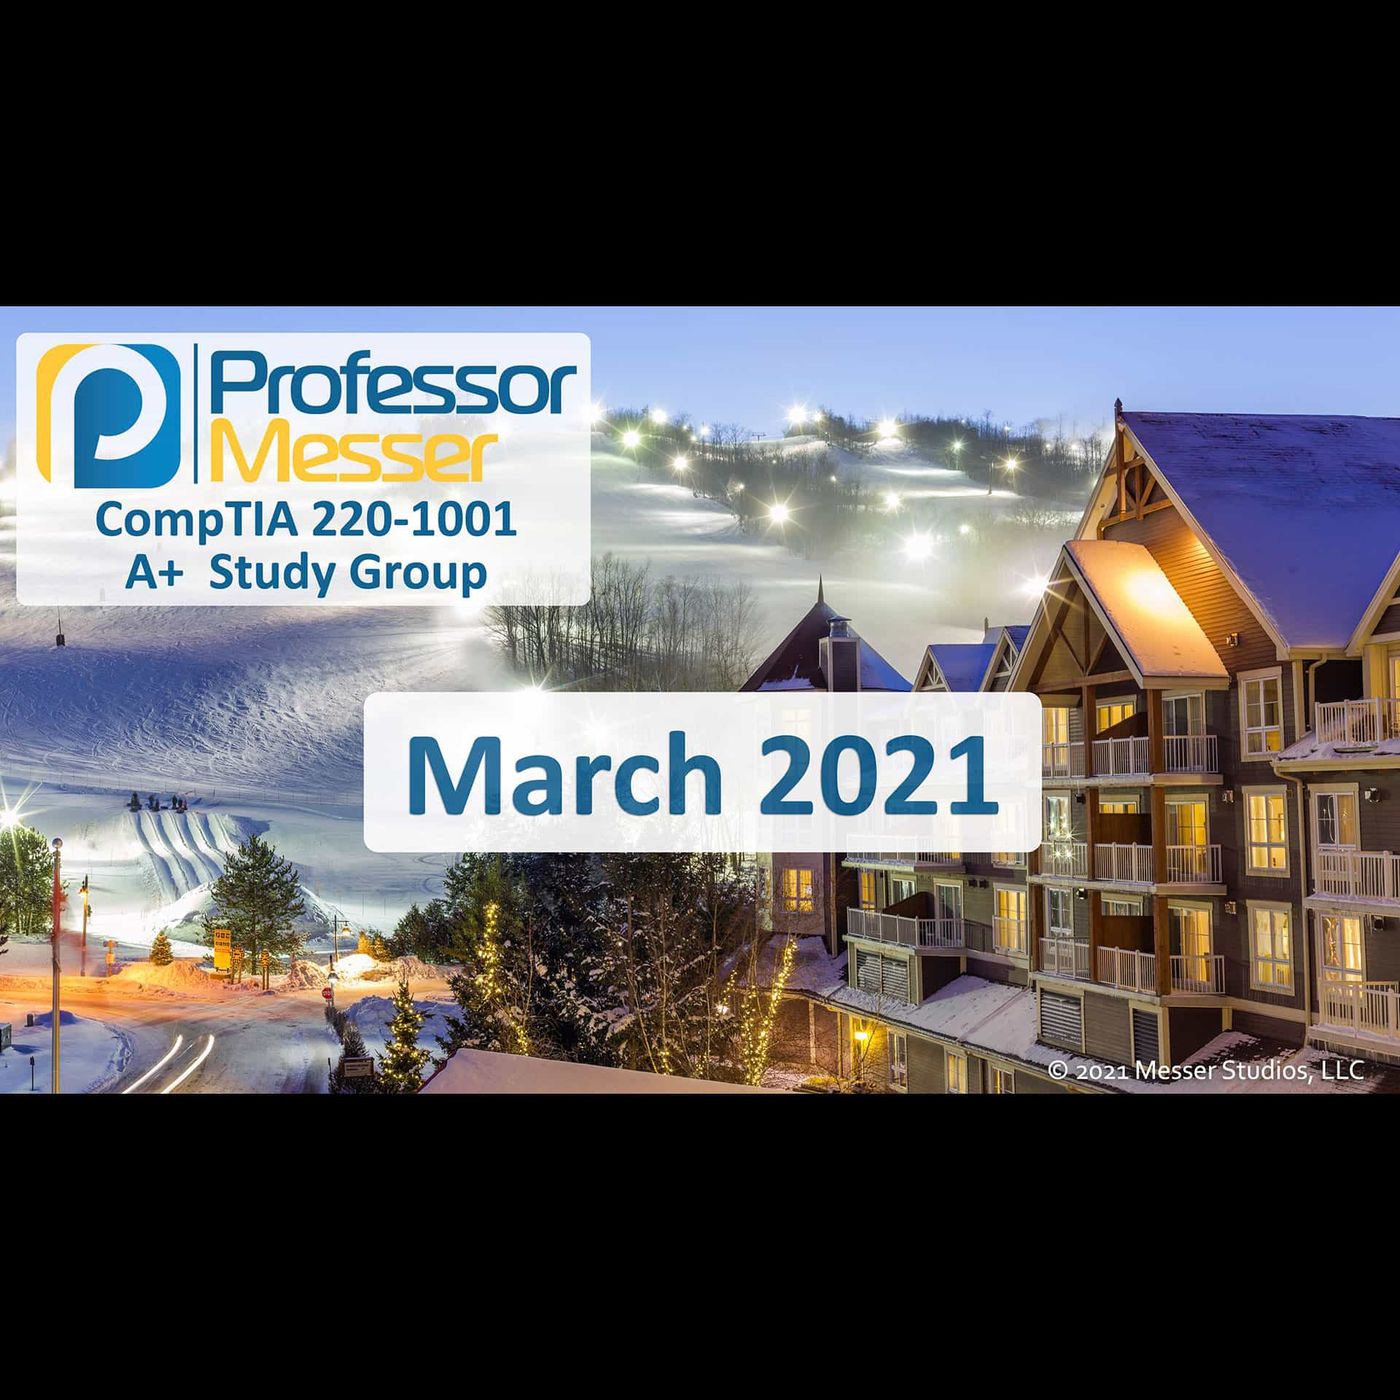 Professor Messer's CompTIA 220-1001 A+ Study Group - March 2021